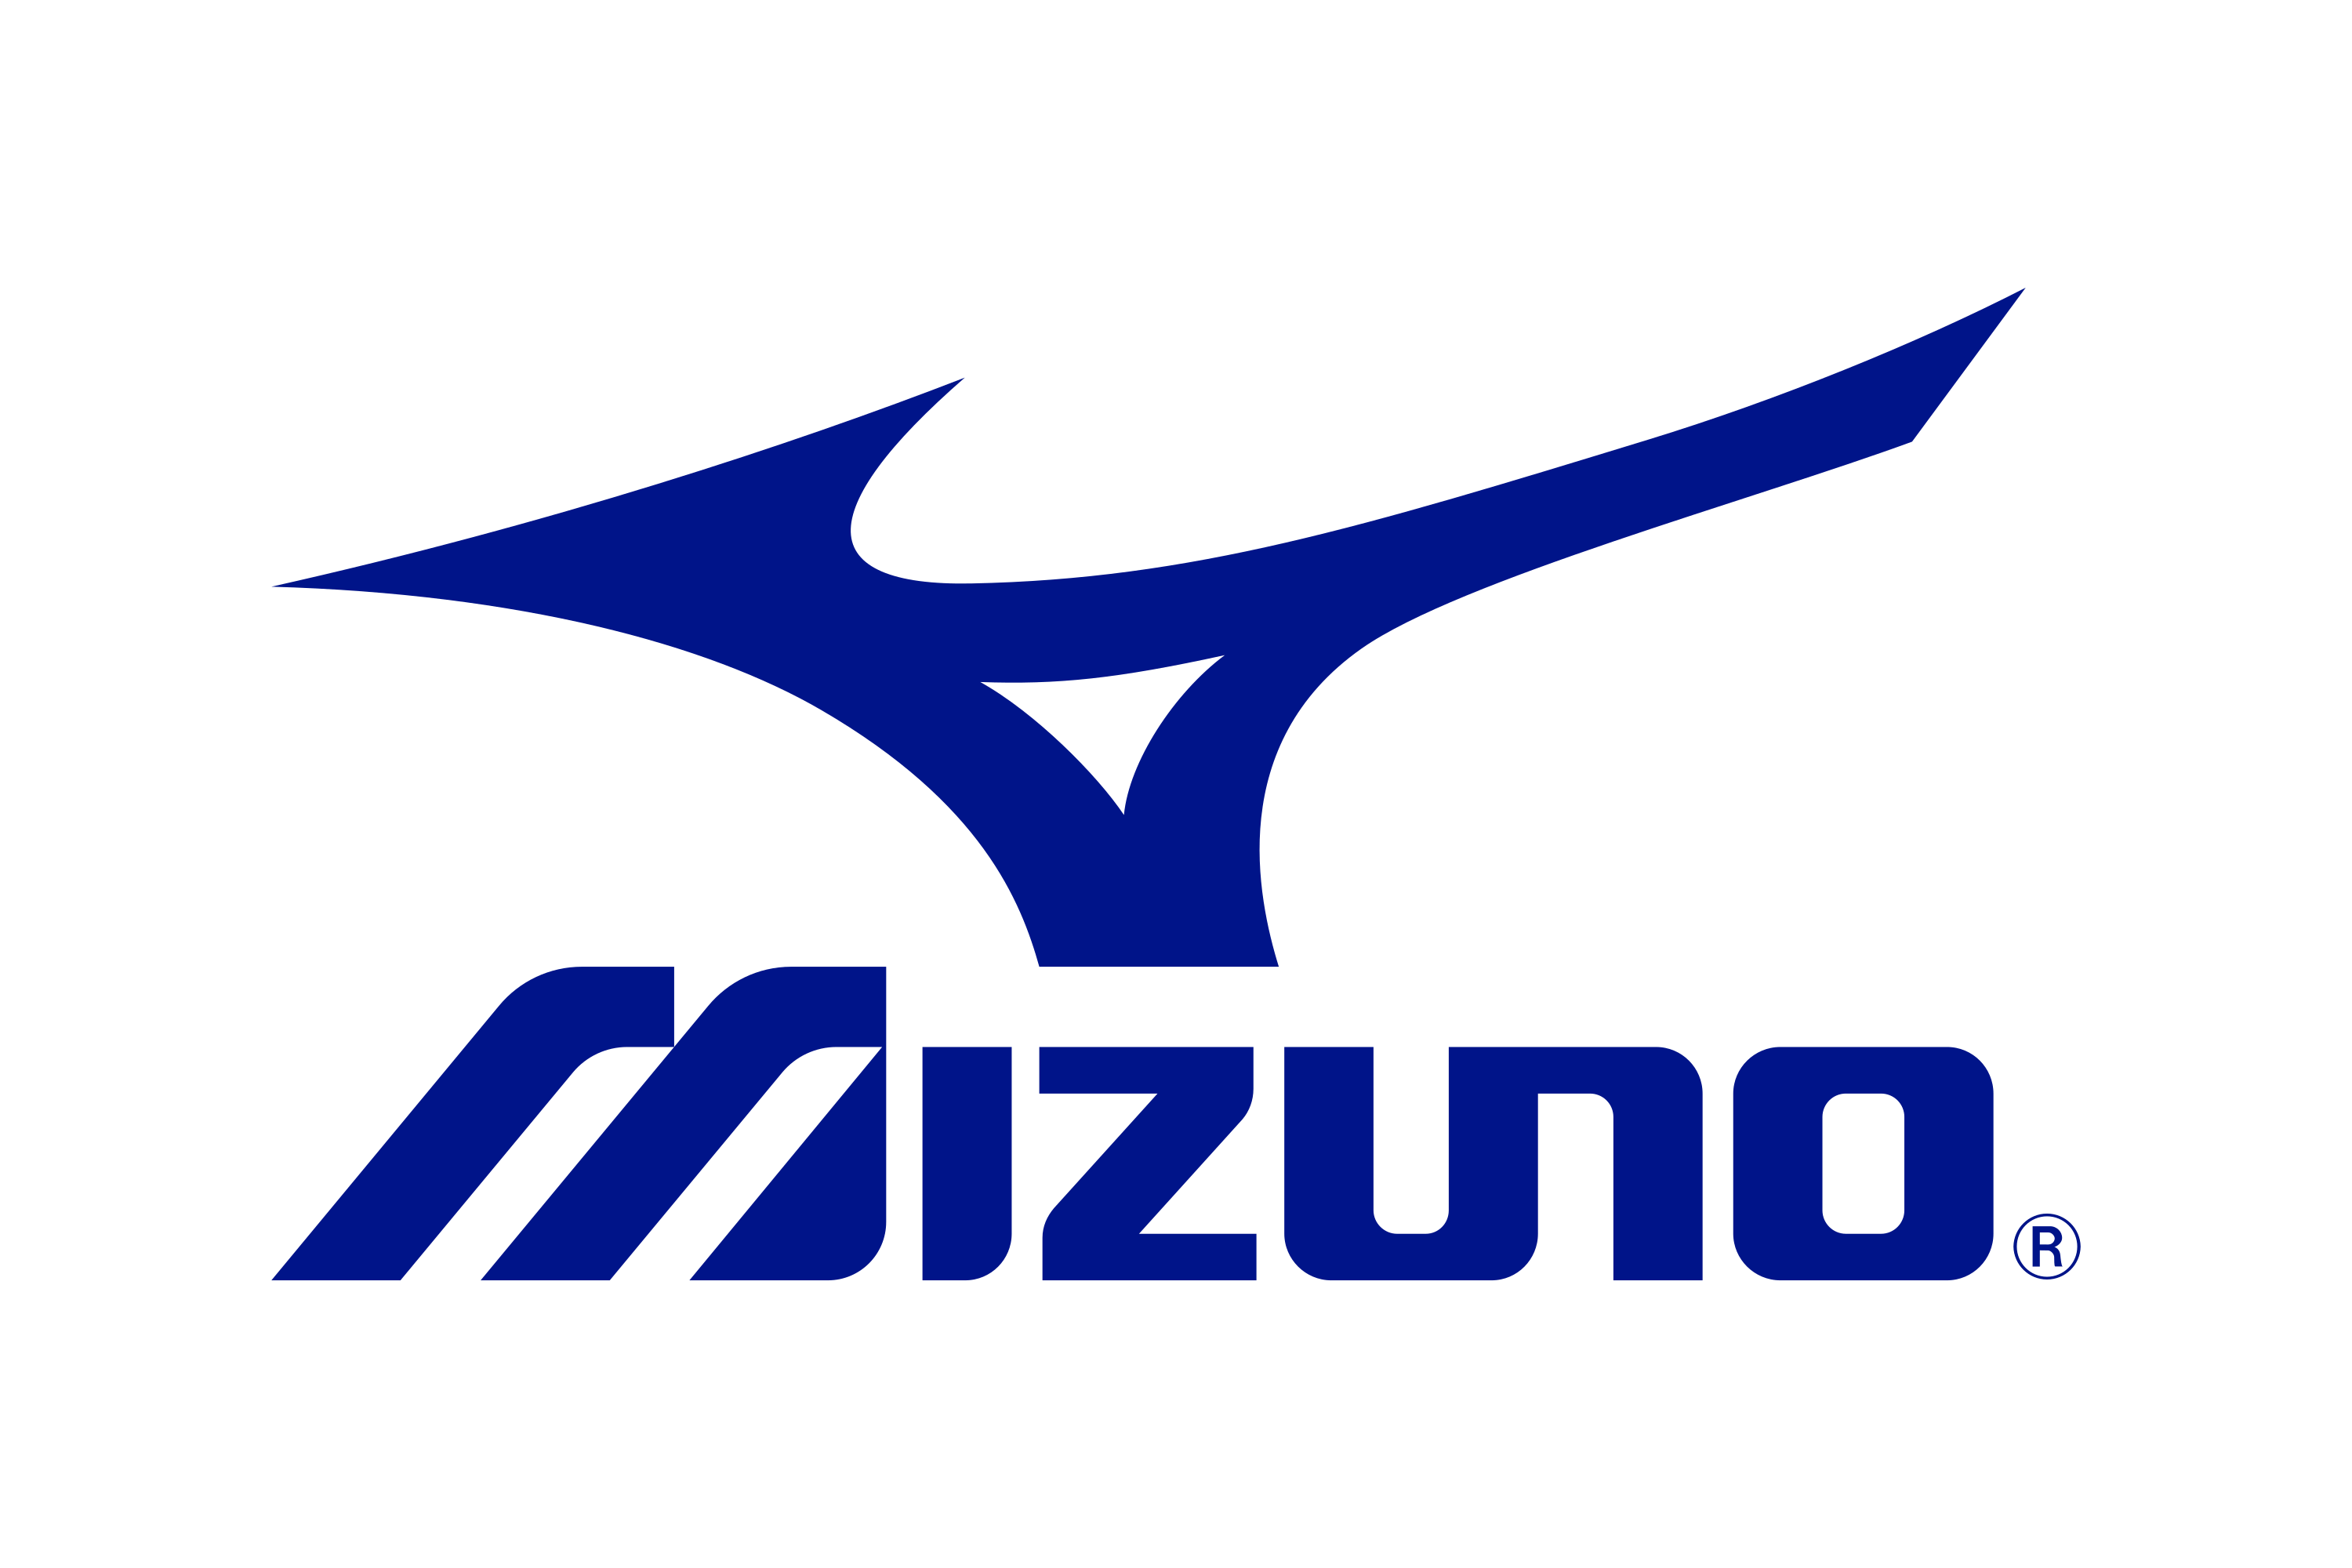 Download Mizuno Corporation Logo in SVG Vector or PNG File Format ...